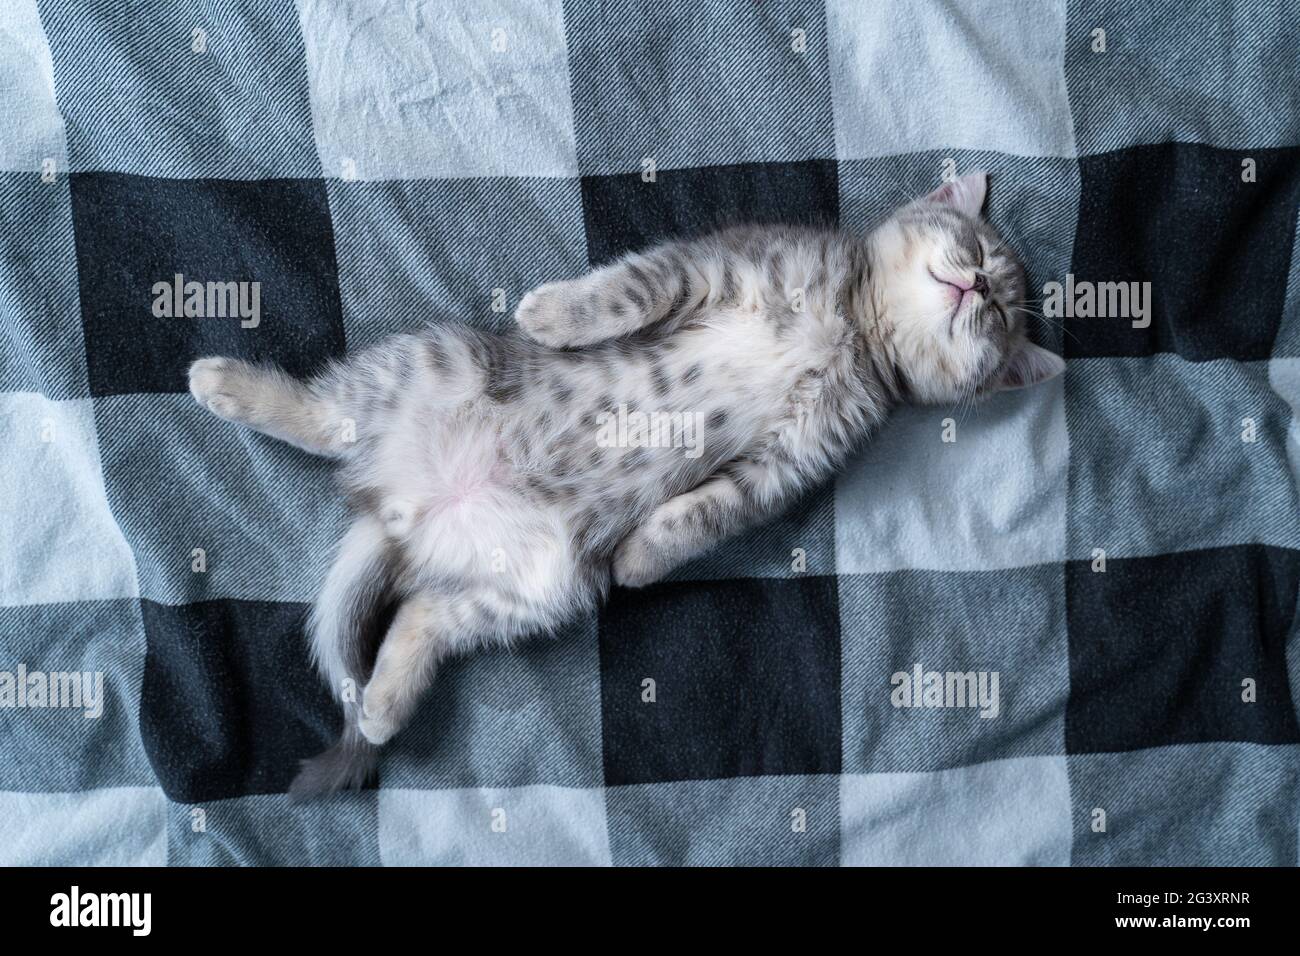 Beautiful little gray tabby cat sleeps sweetly on plaid blanket on bed at home. Kitten of Scottish Straight breed lies on back w Stock Photo